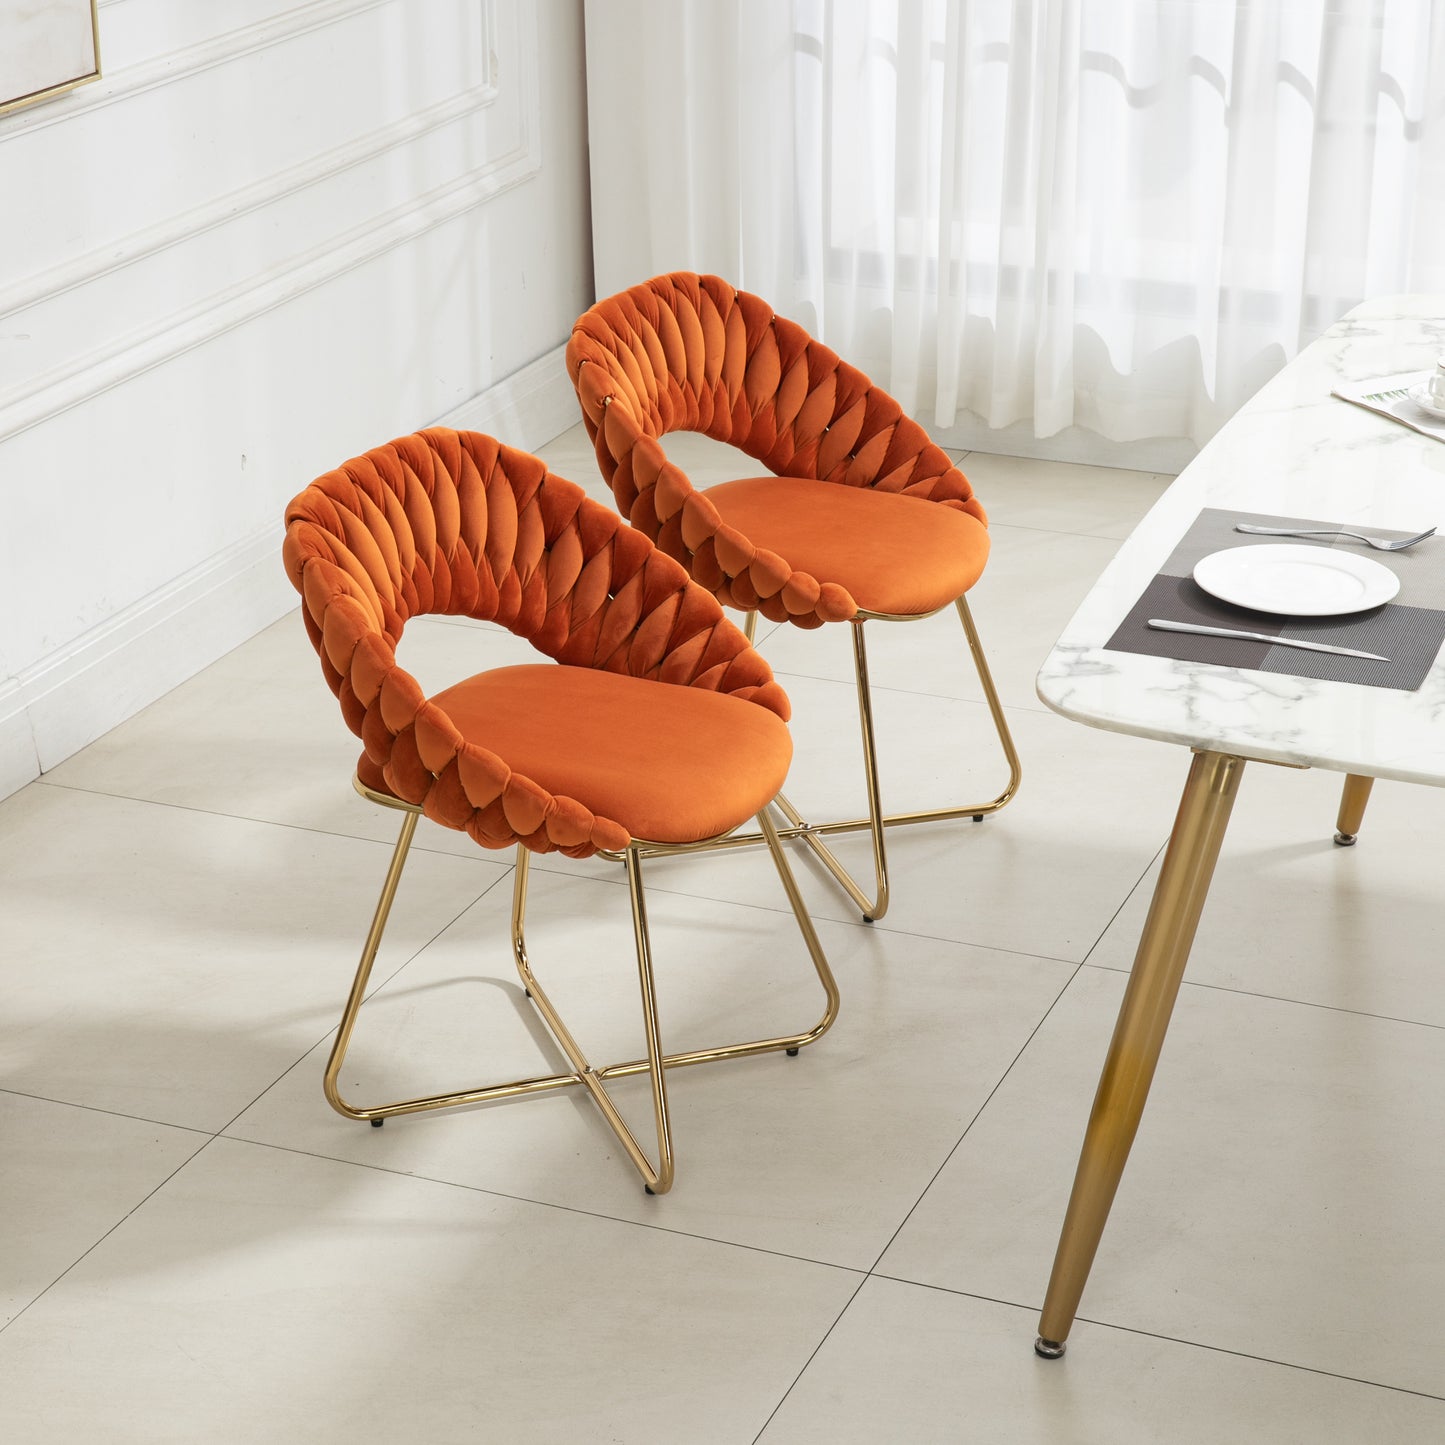 Oxitil Orange Accent Chairs Set of 2